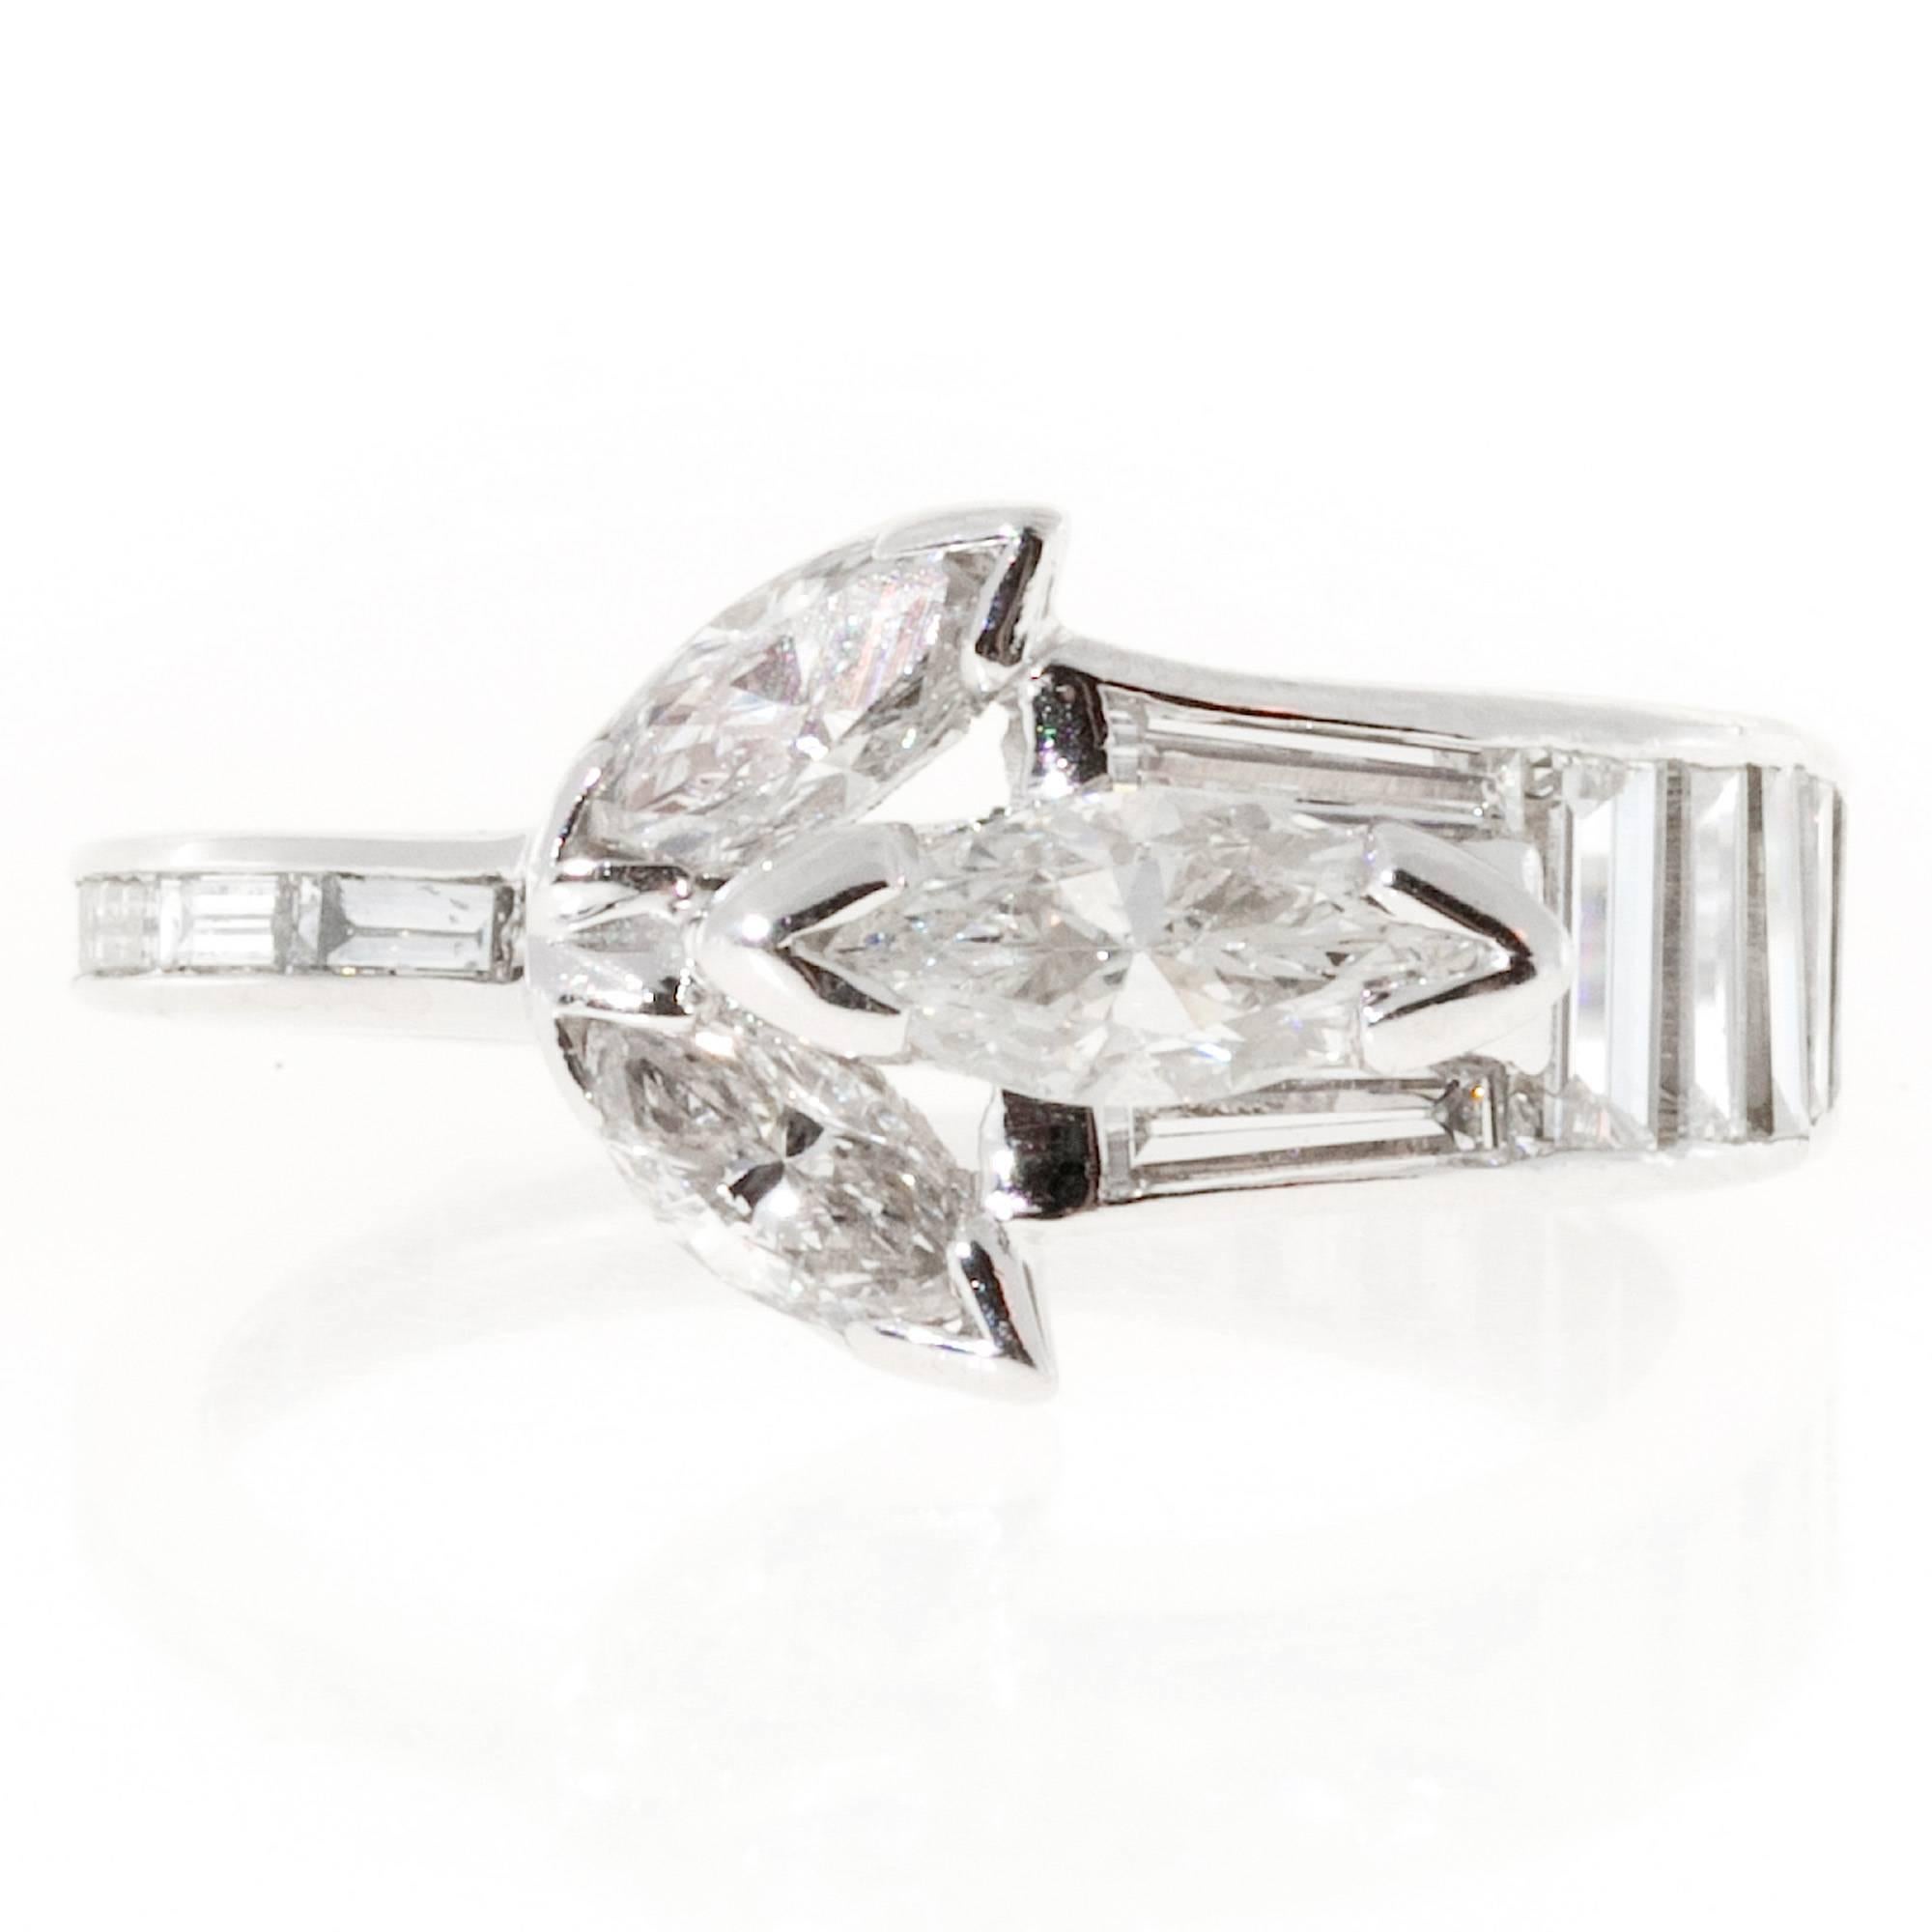 1.35 carat Marquise Baguette Diamond platinum ring.

3 Marquise diamonds, approx. total weight .55cts, F-G, VS
19 Baguette cut diamonds, approx. total weight .80cts F-G, VS
Size 3 and not sizable
Platinum
Platinum 950
Tested: Platinum
Stamped: